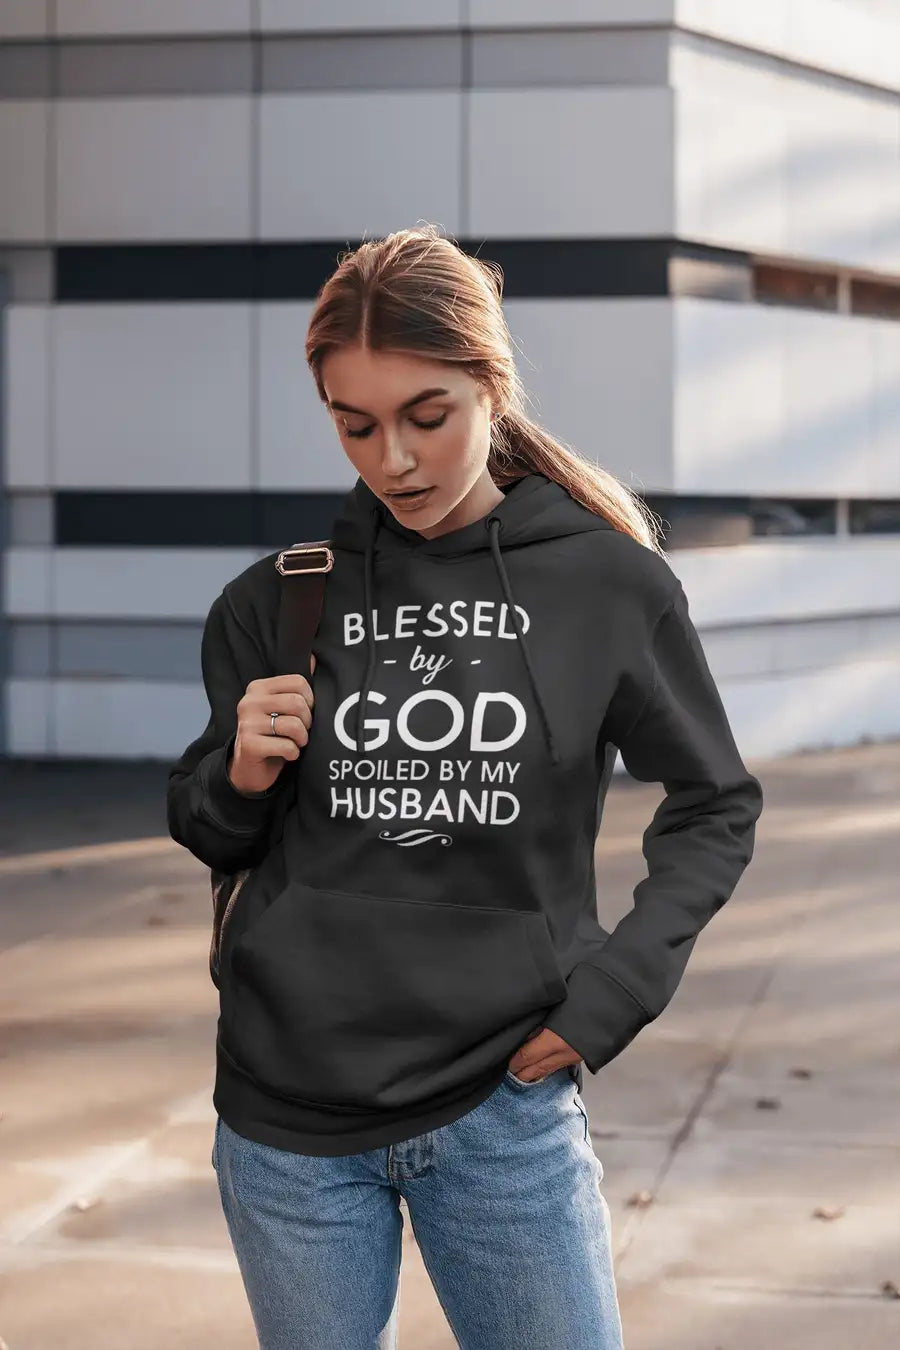 Spoiled By My Husband Black T Shirt / Hoodie for Married Women | Premium Design - Catch My Drift India Clothing black, clothing, couples, female, full sleeves, hoodie, jacket, made in india, 